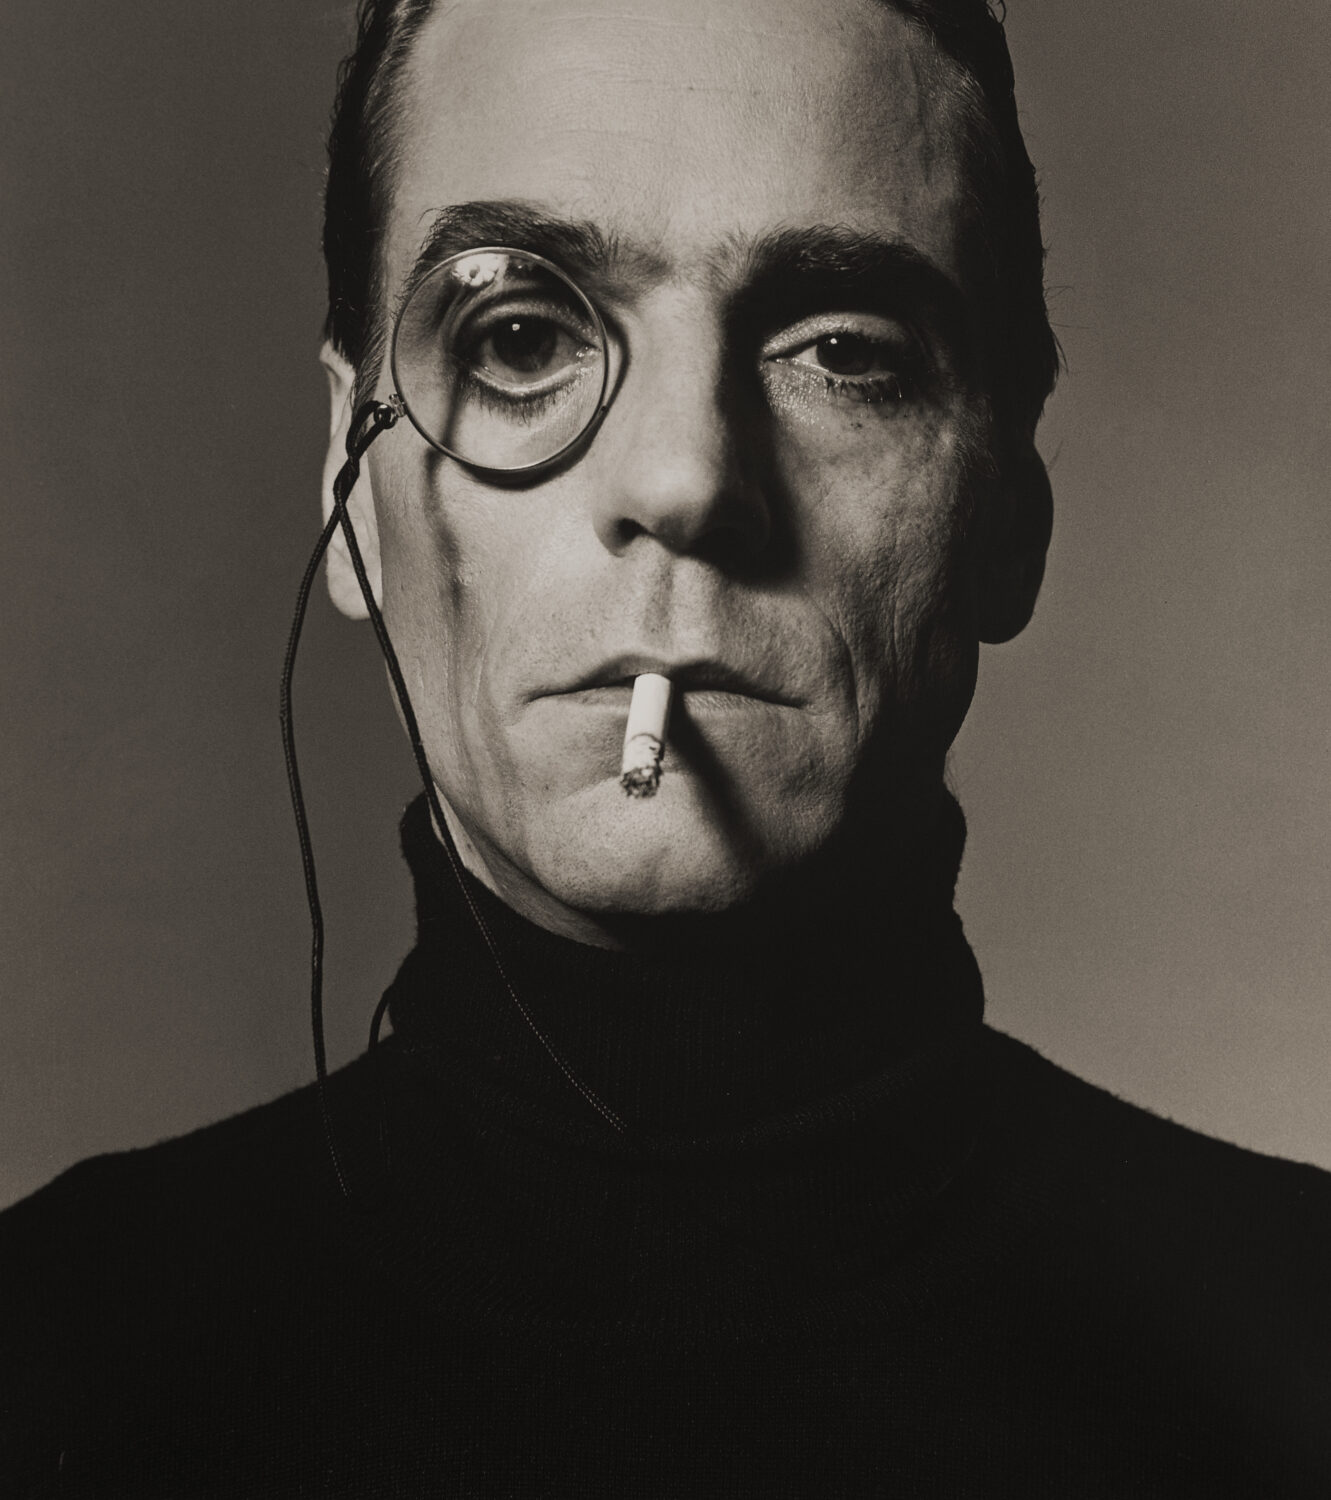 Michel Comte: Jeremy Irons with Monocle